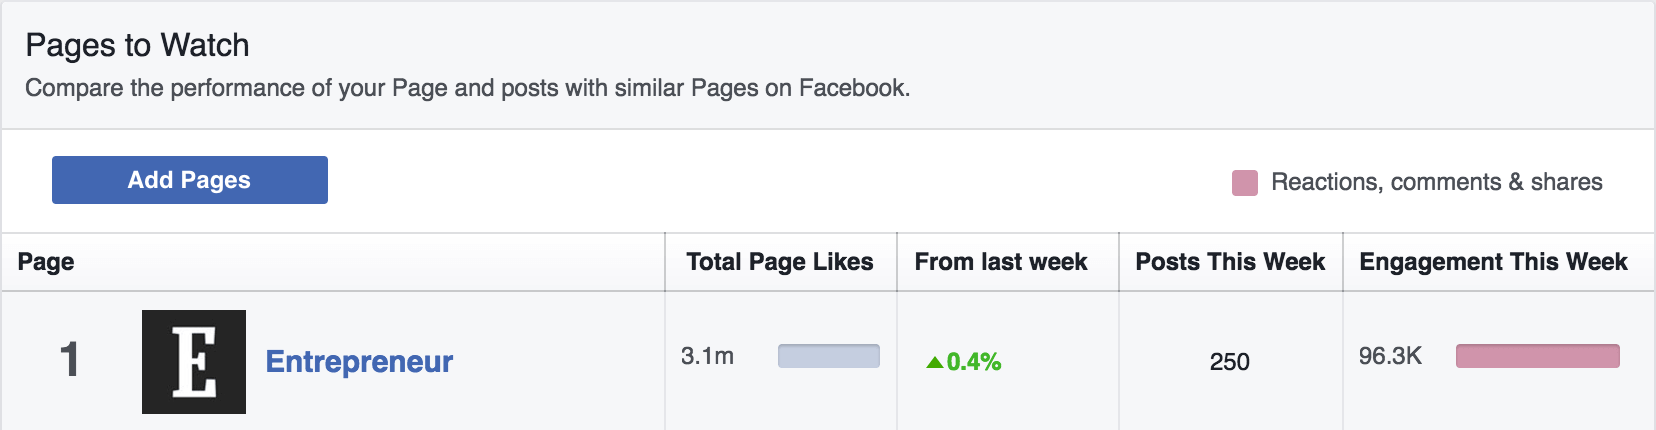 Learning from your competitors using Facebook Insights > Pages to Watch